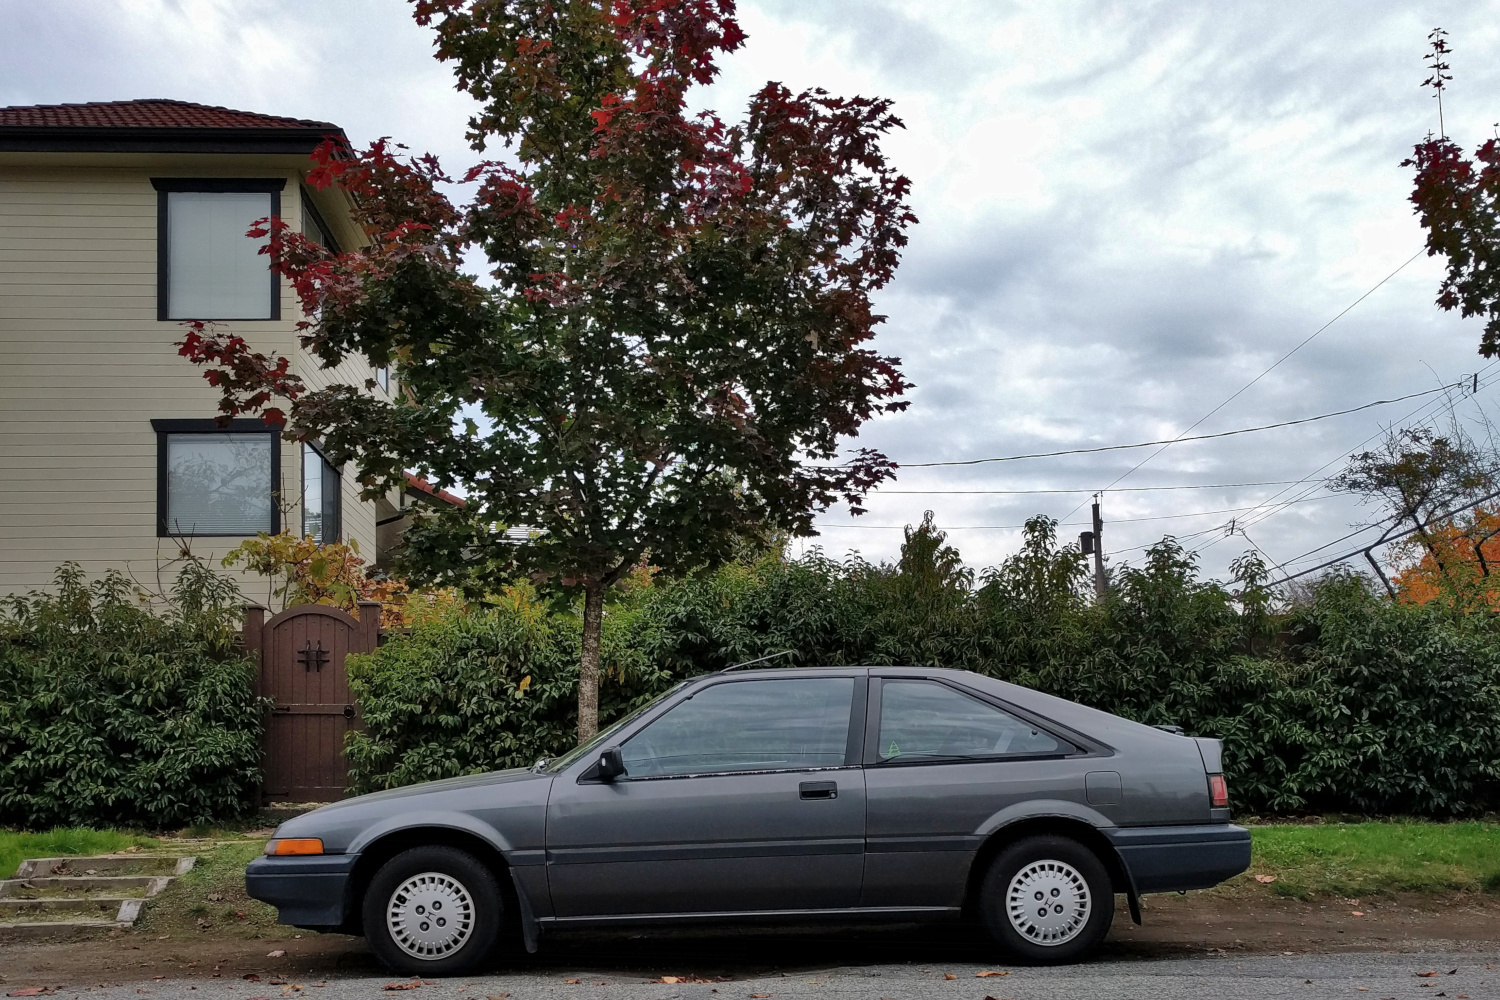 Old Parked Cars Vancouver: 1989 Honda Accord S Hatchback